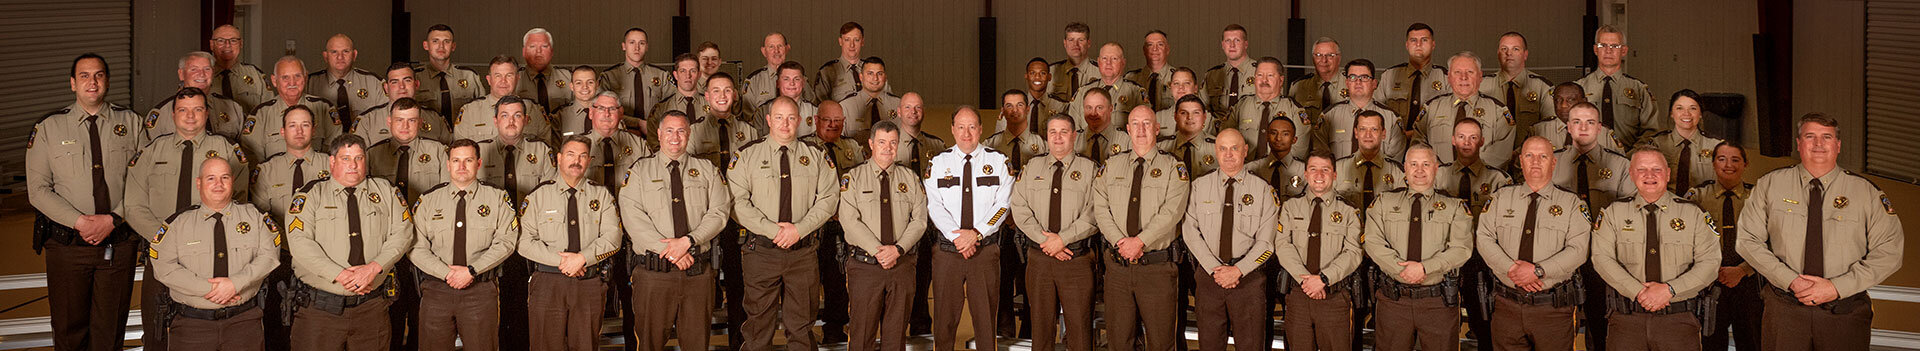 Sheriff and staff standing all together with shirts and ties